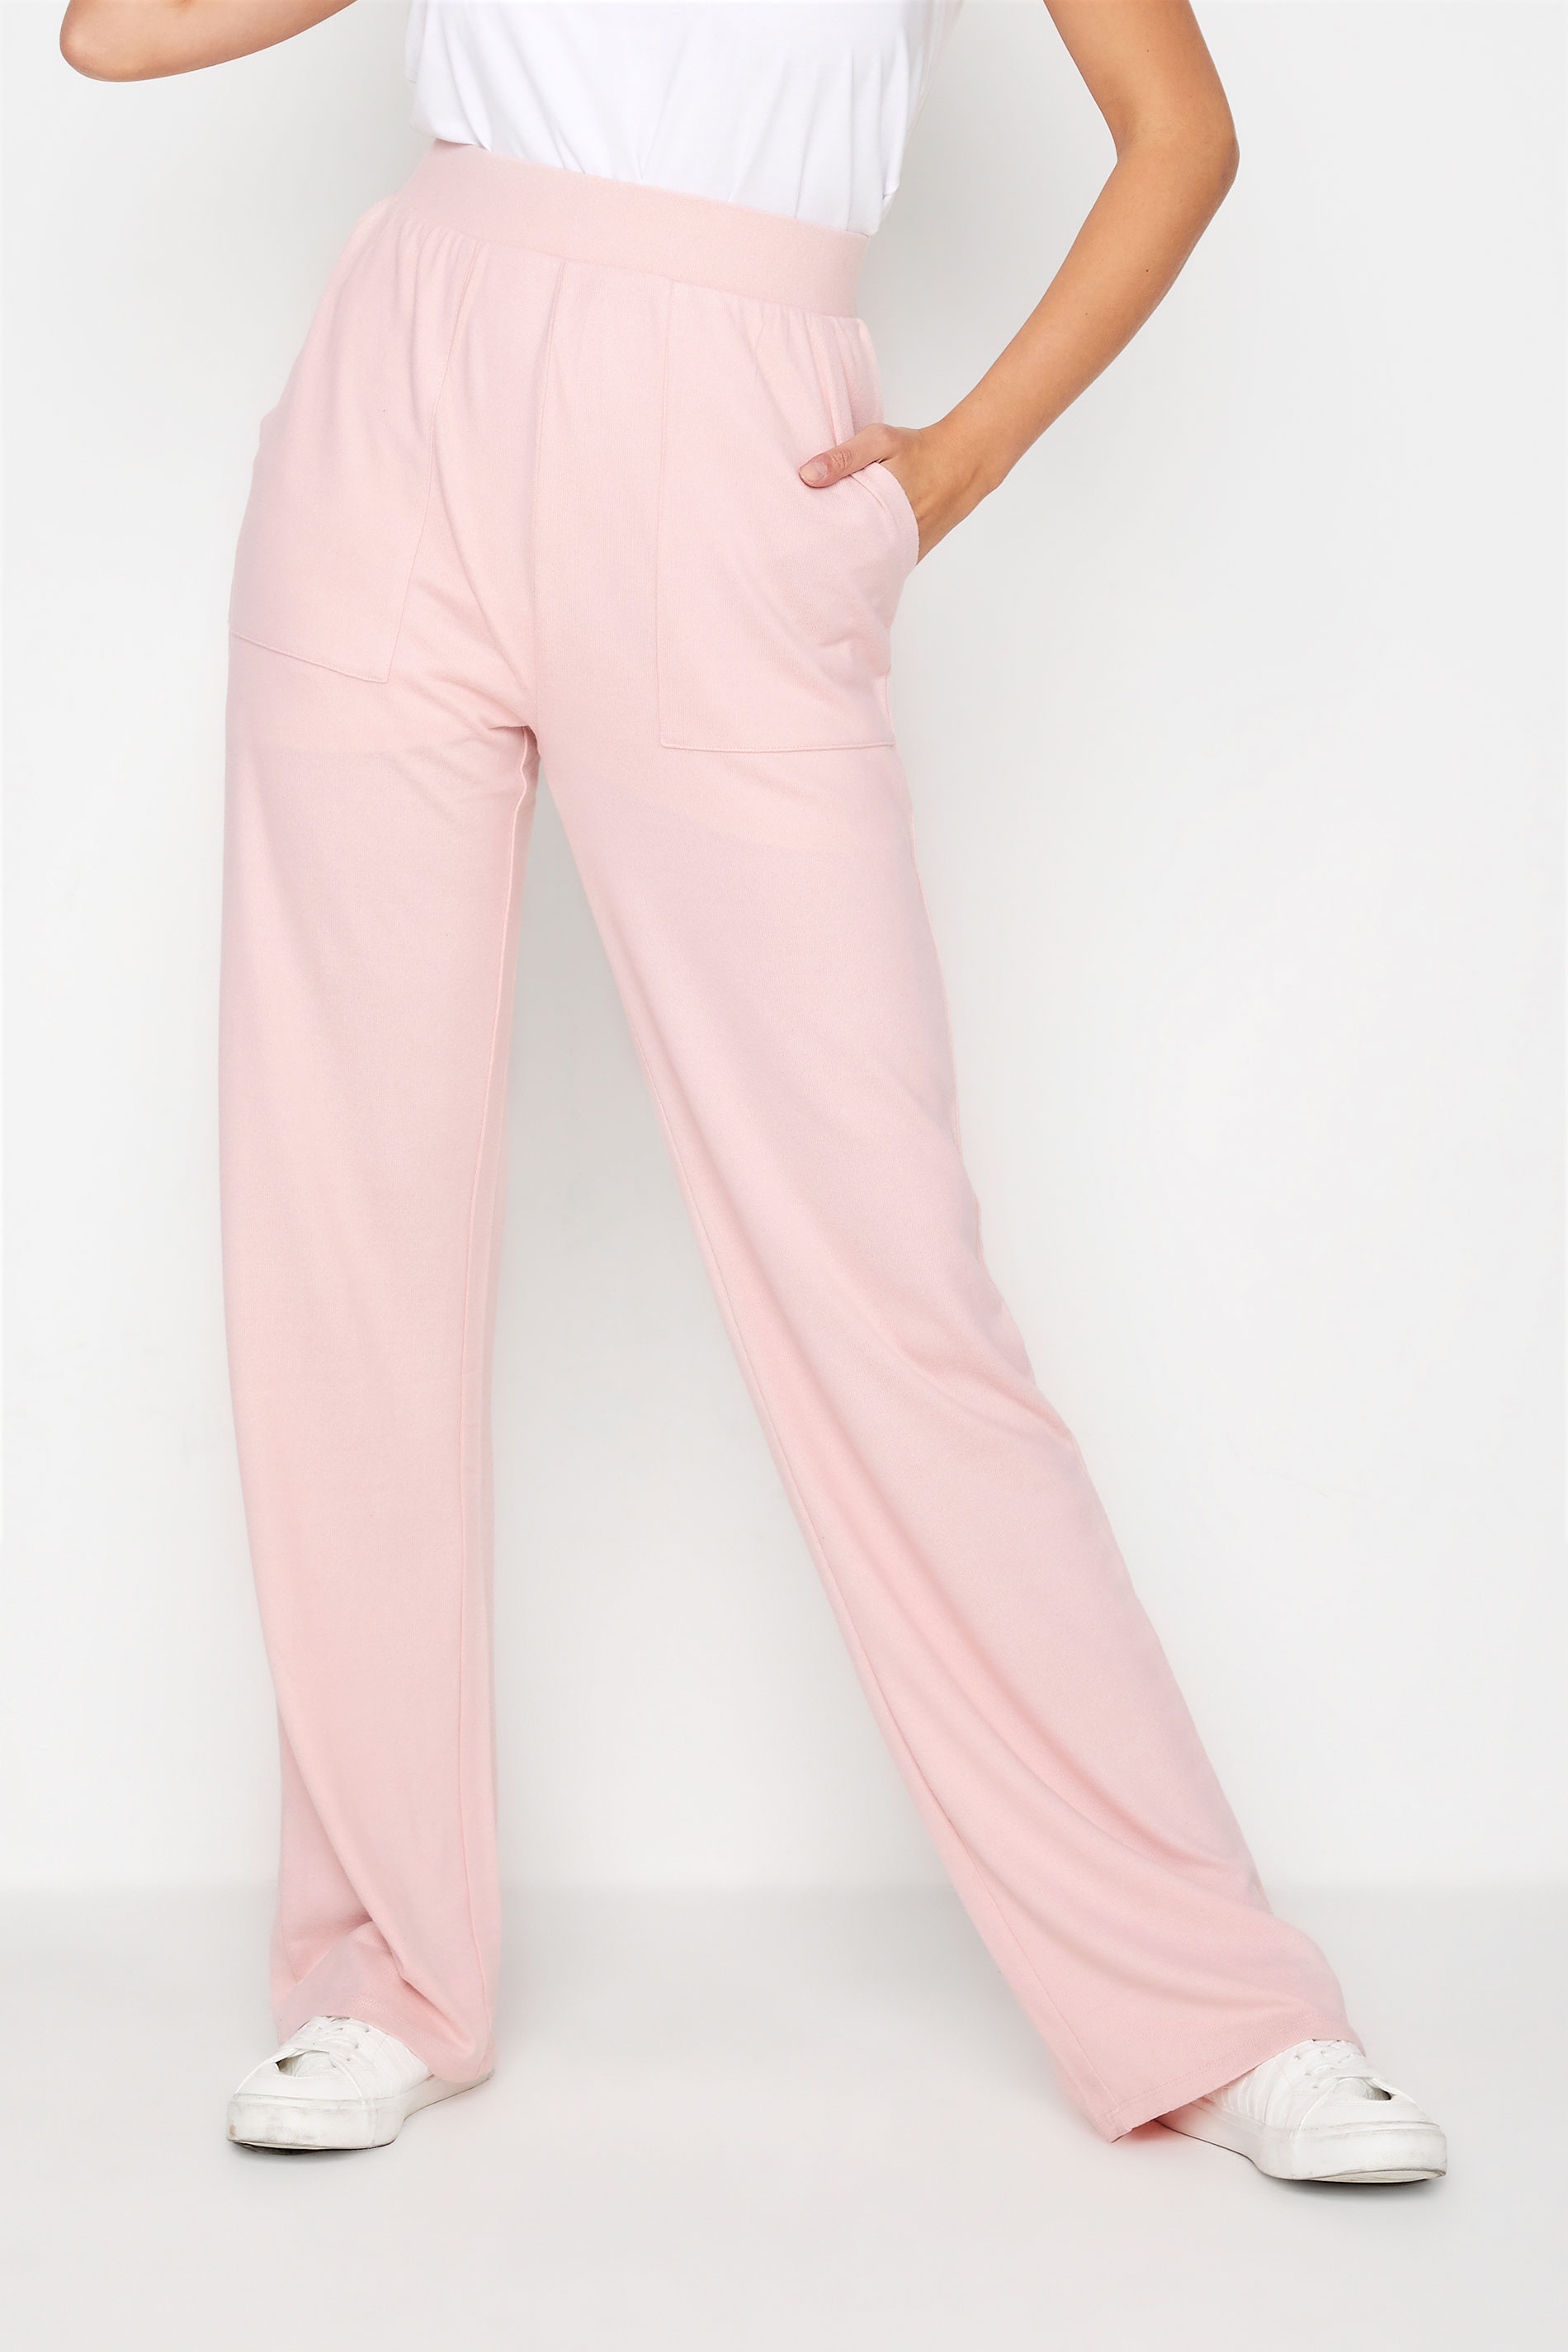 LTS Tall Pink Soft Touch Straight Leg Joggers 1